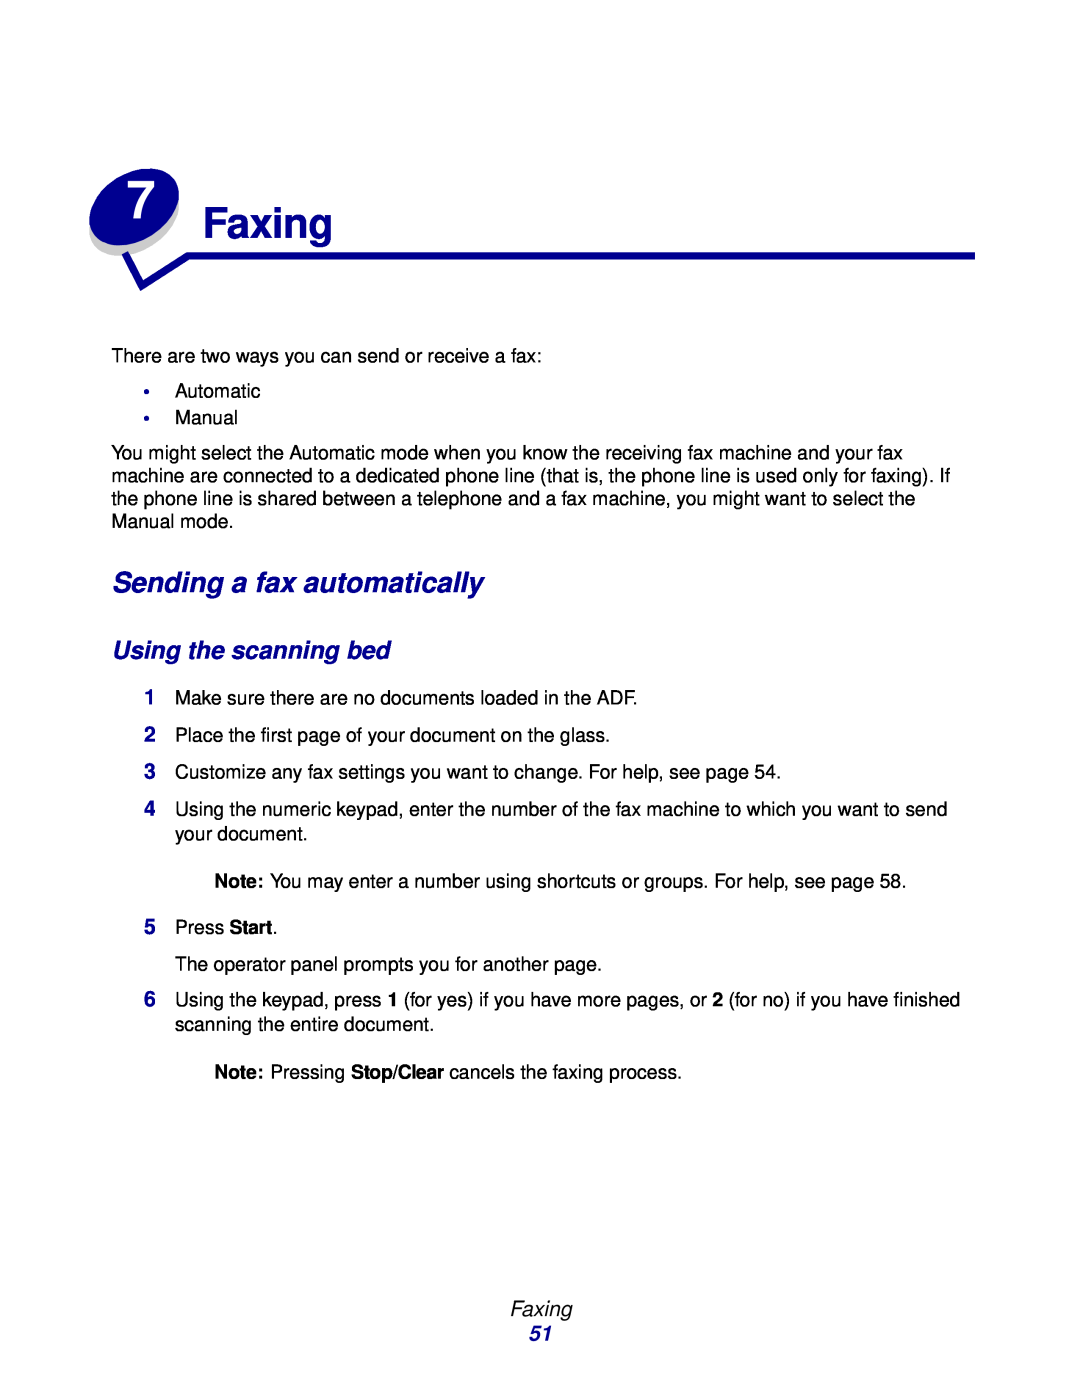 Lexmark X215 MFP manual Faxing, Sending a fax automatically, Using the scanning bed 